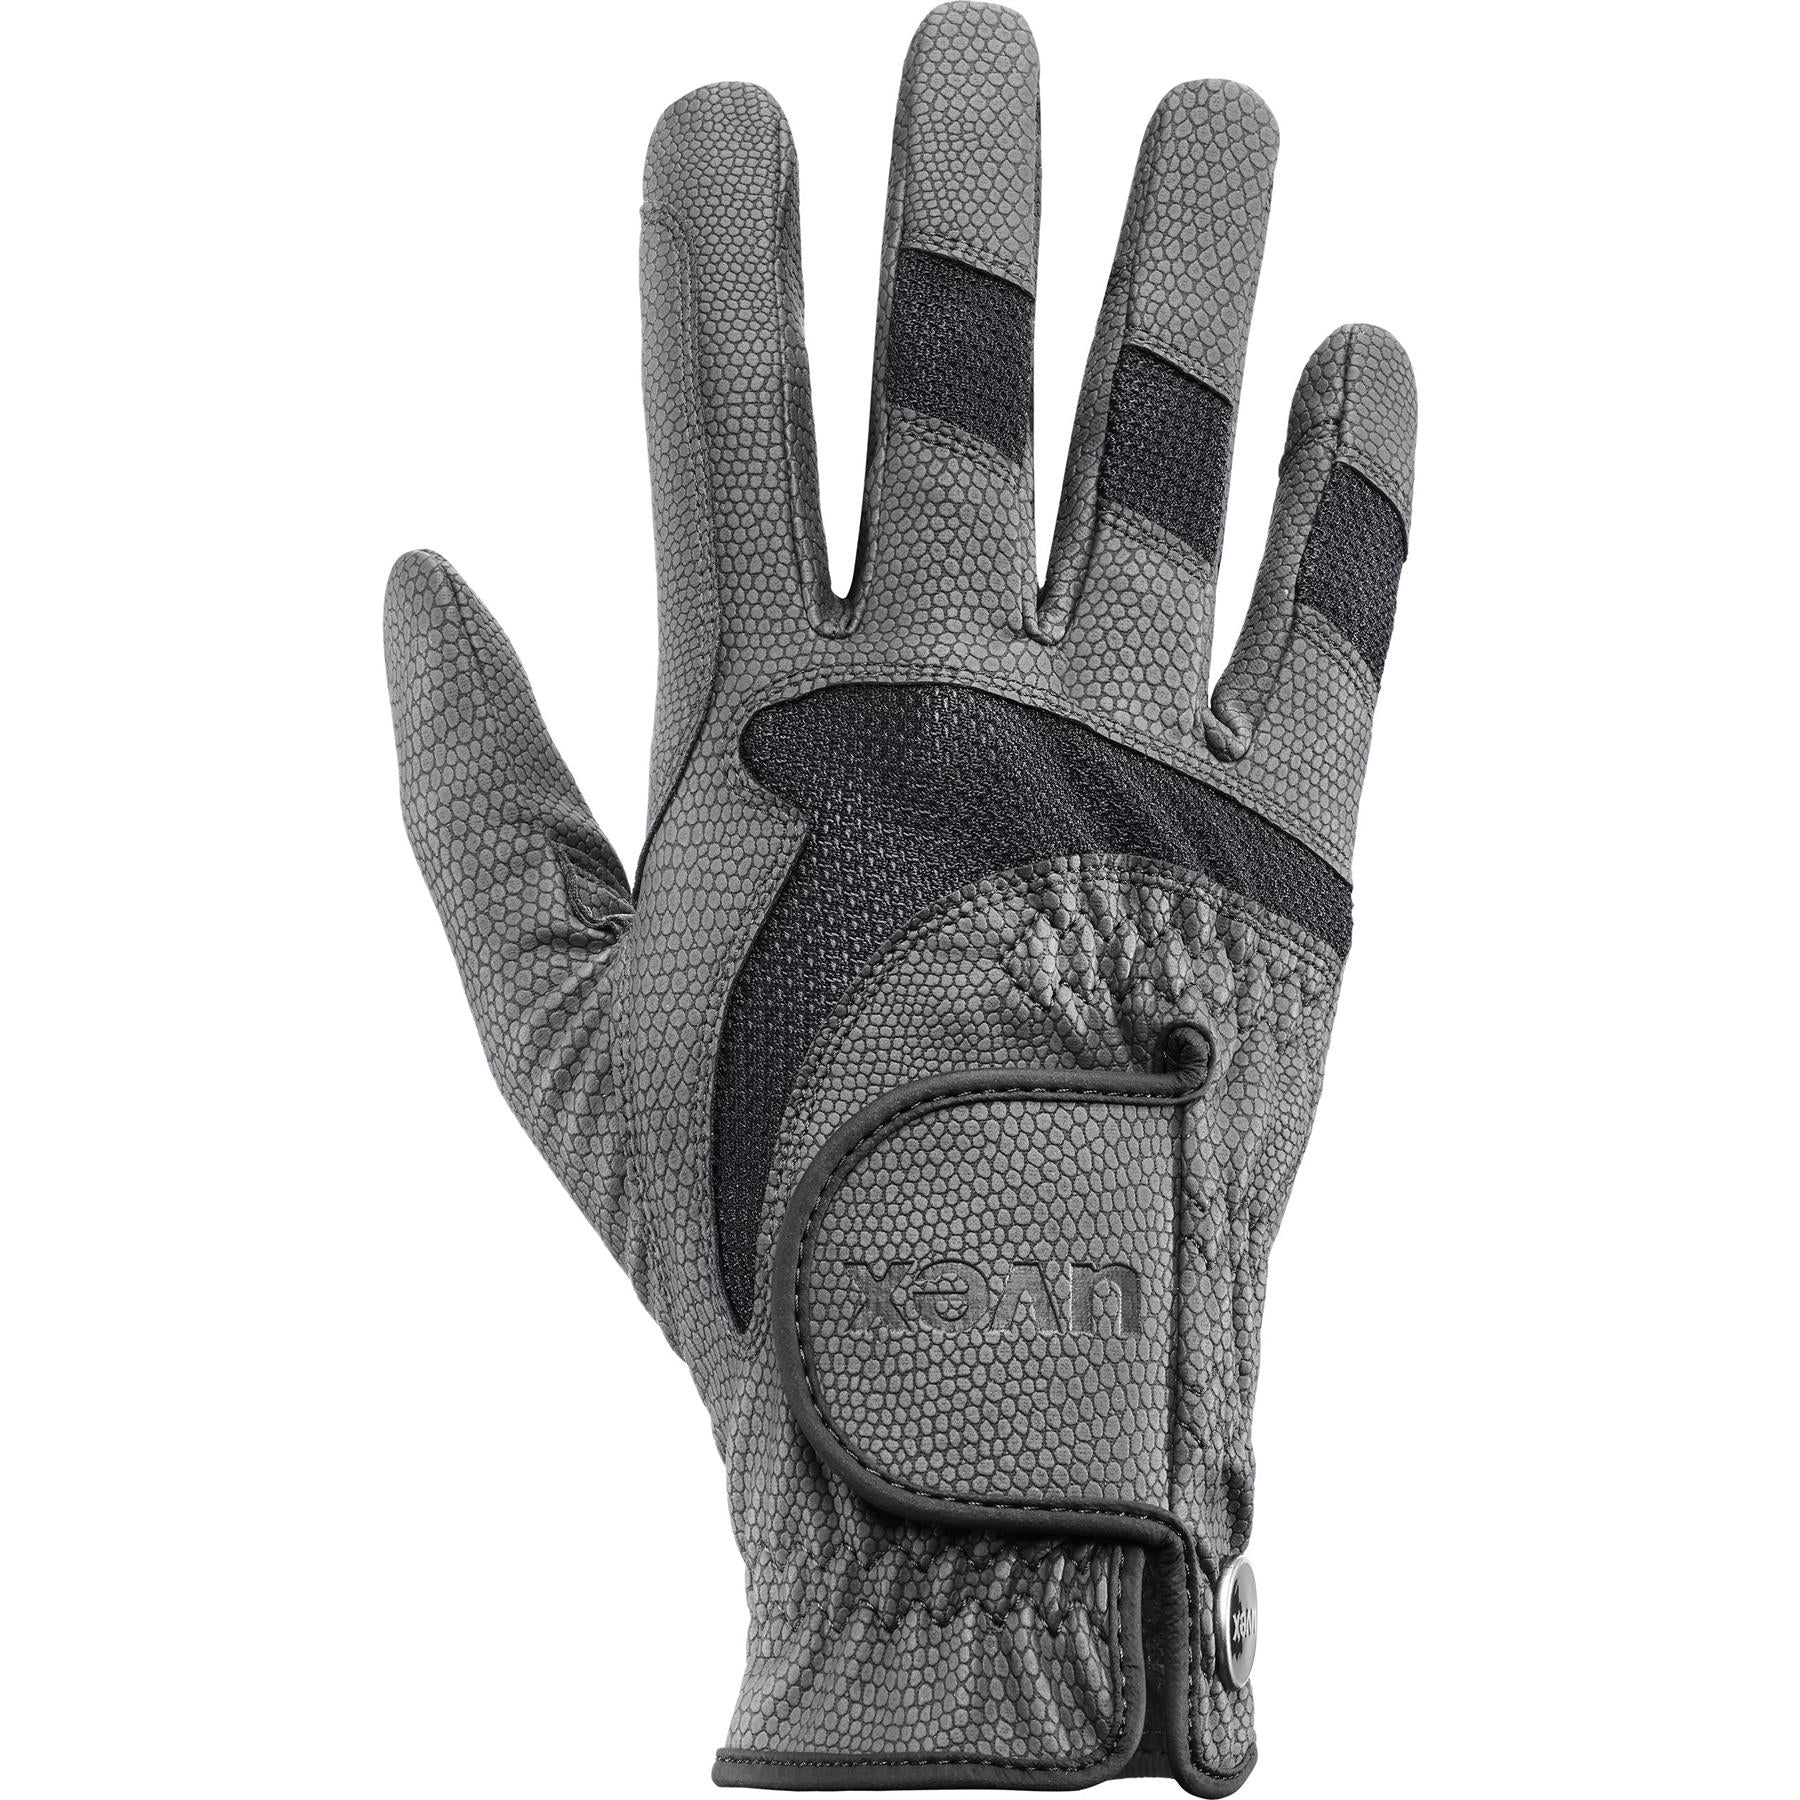 Uvex I-Perfomance 2 Horse Riding Gloves - Just Horse Riders